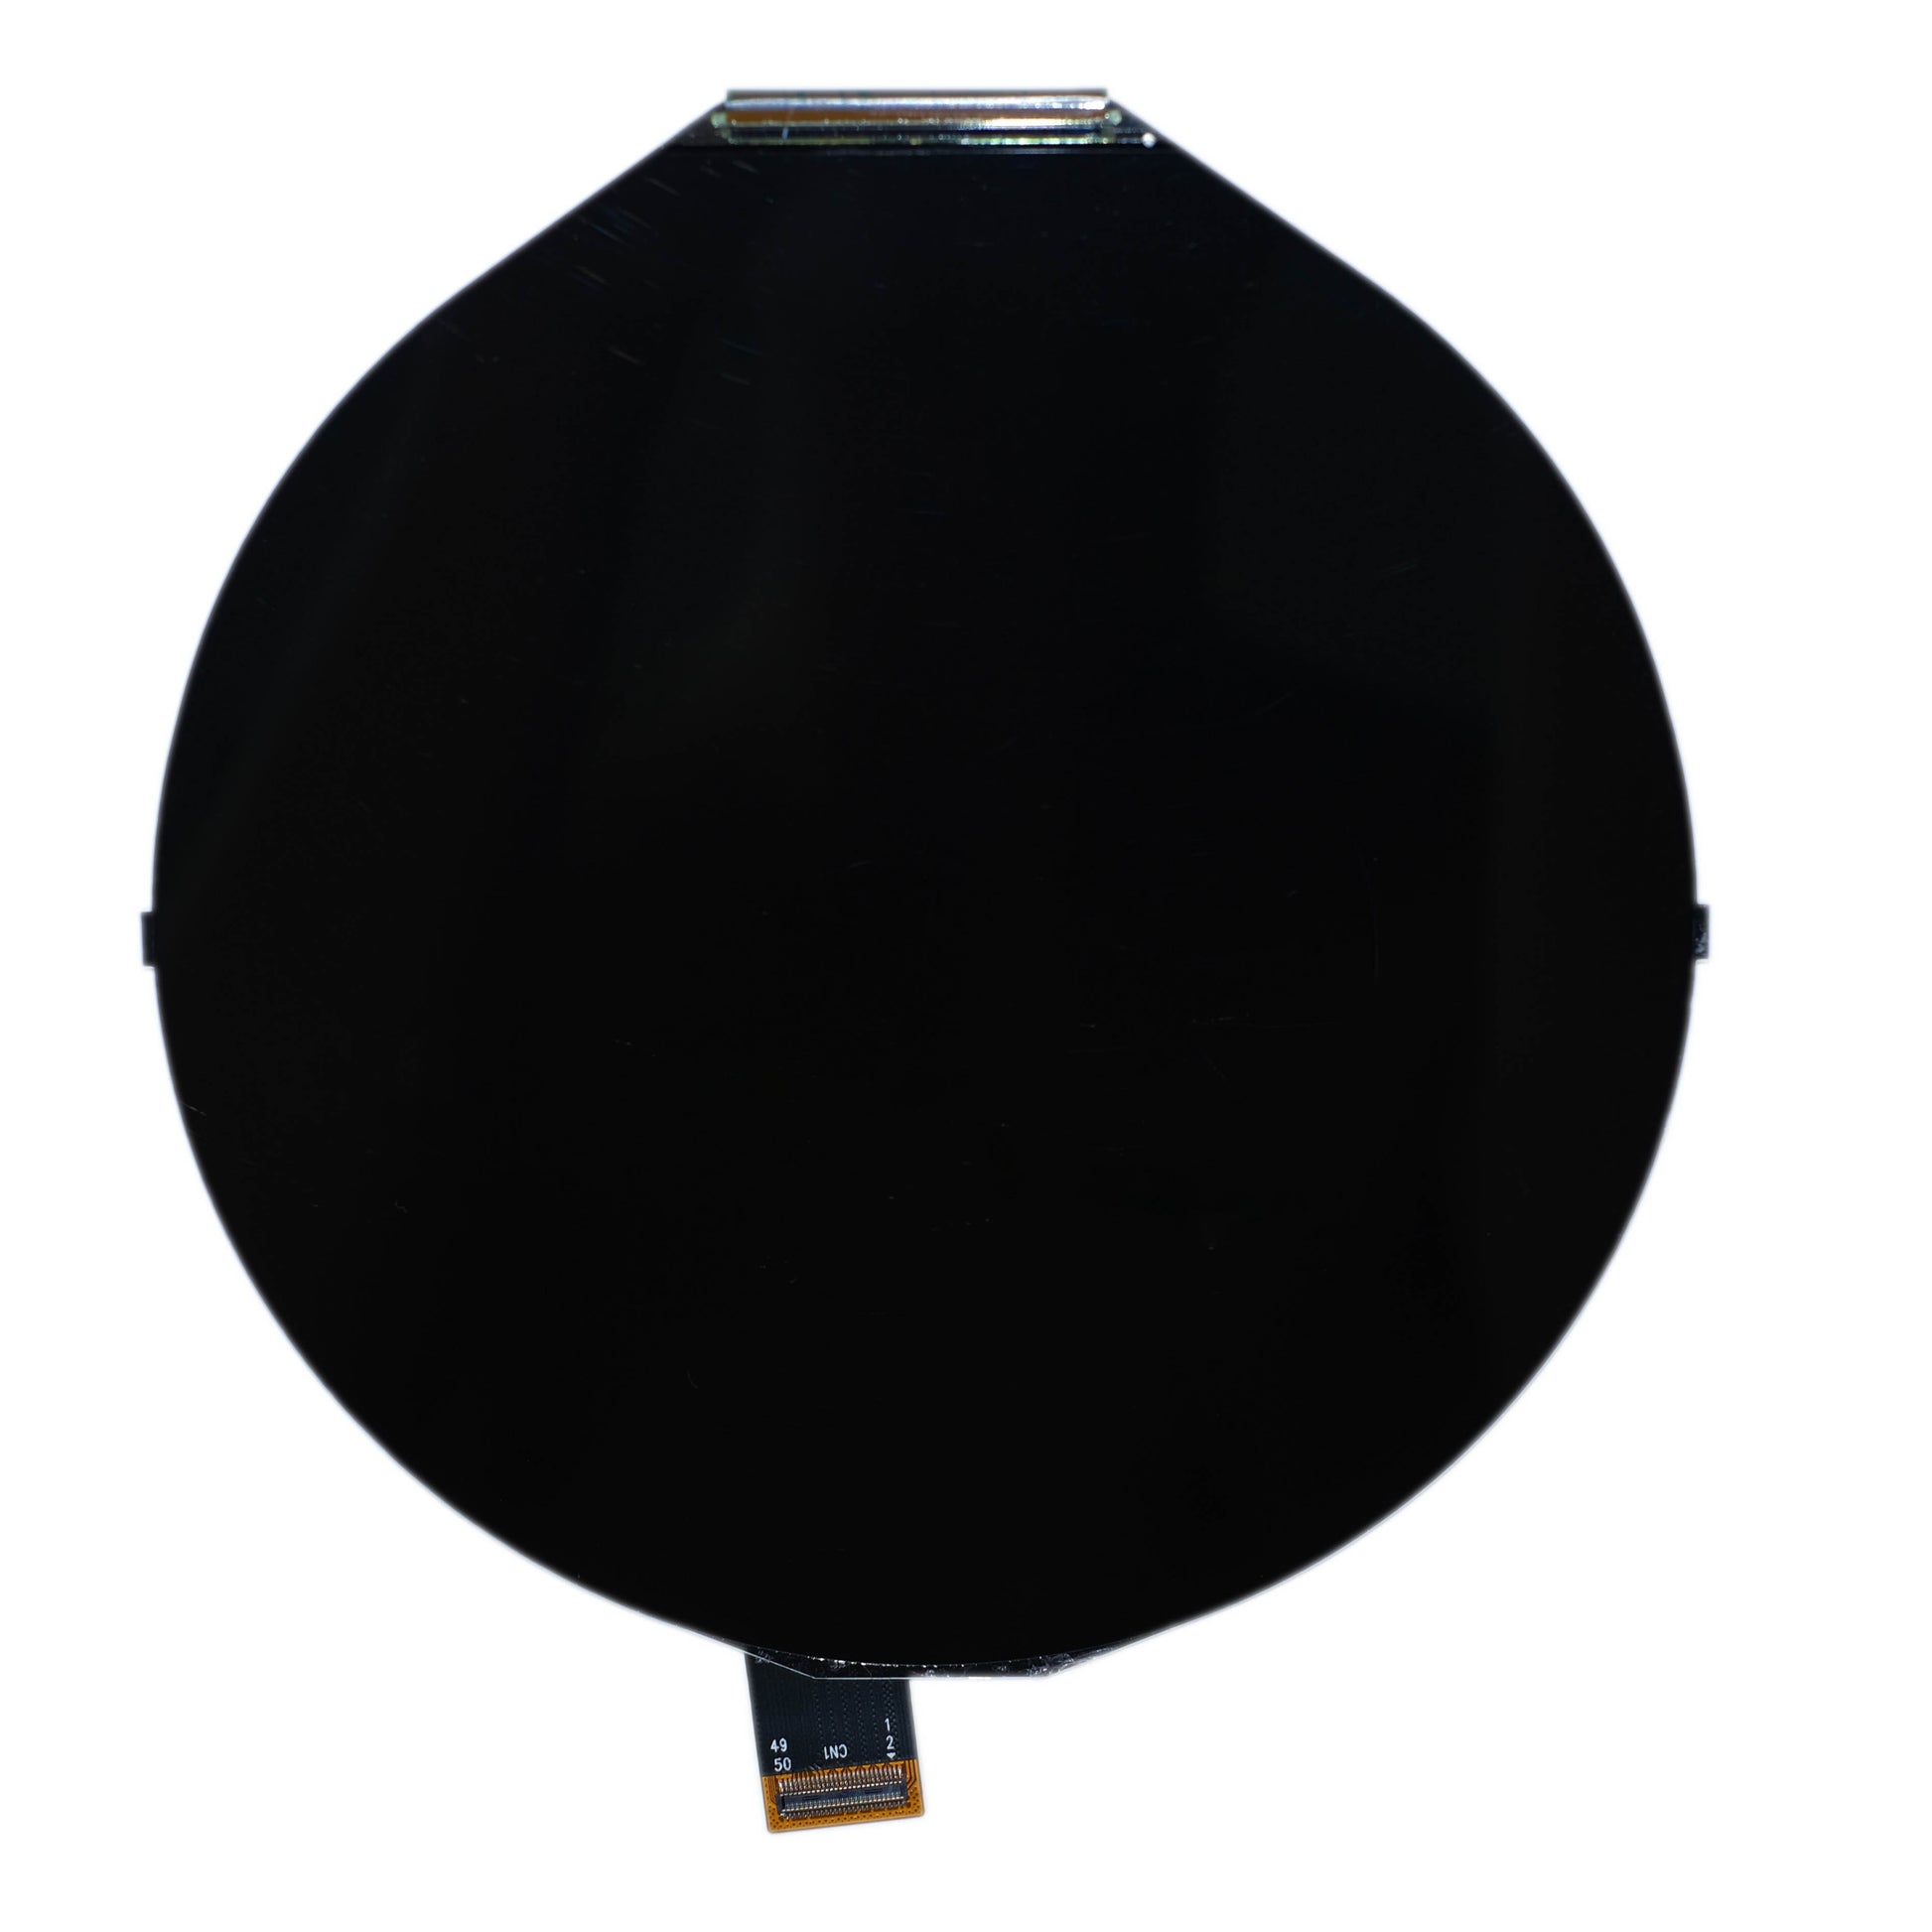 5.0-inch round TFT display panel with 1080x1080 resolution, supporting 16 million colors in transmissive mode, using MIPI DSI connection